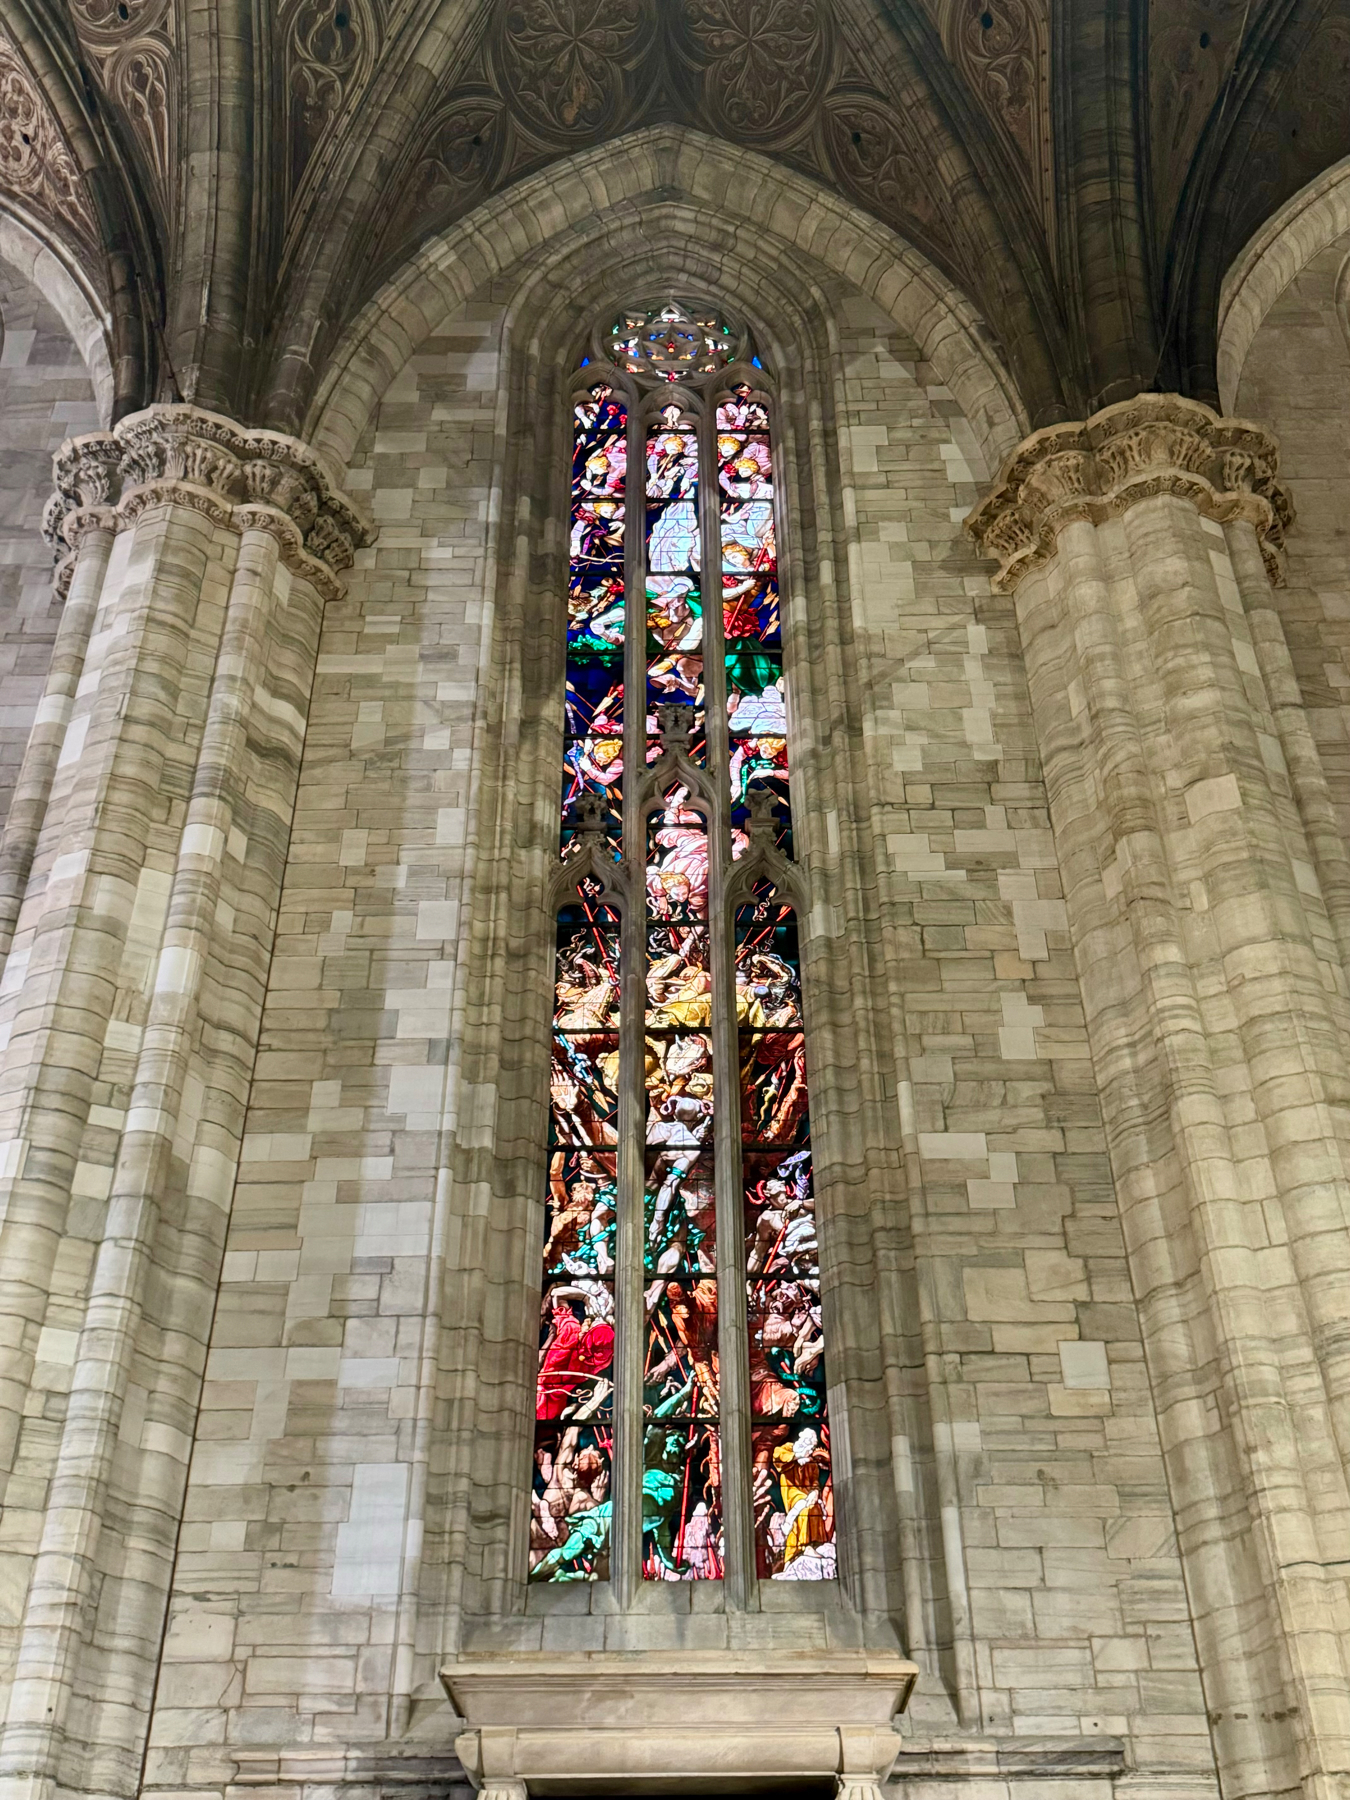 A tall, narrow stained glass window set in a gothic-style arched frame within a stone cathedral wall. The window features intricate depictions of religious scenes and figures in vivid colors. The surrounding architecture includes ornate stone columns and a vaulted ceiling.